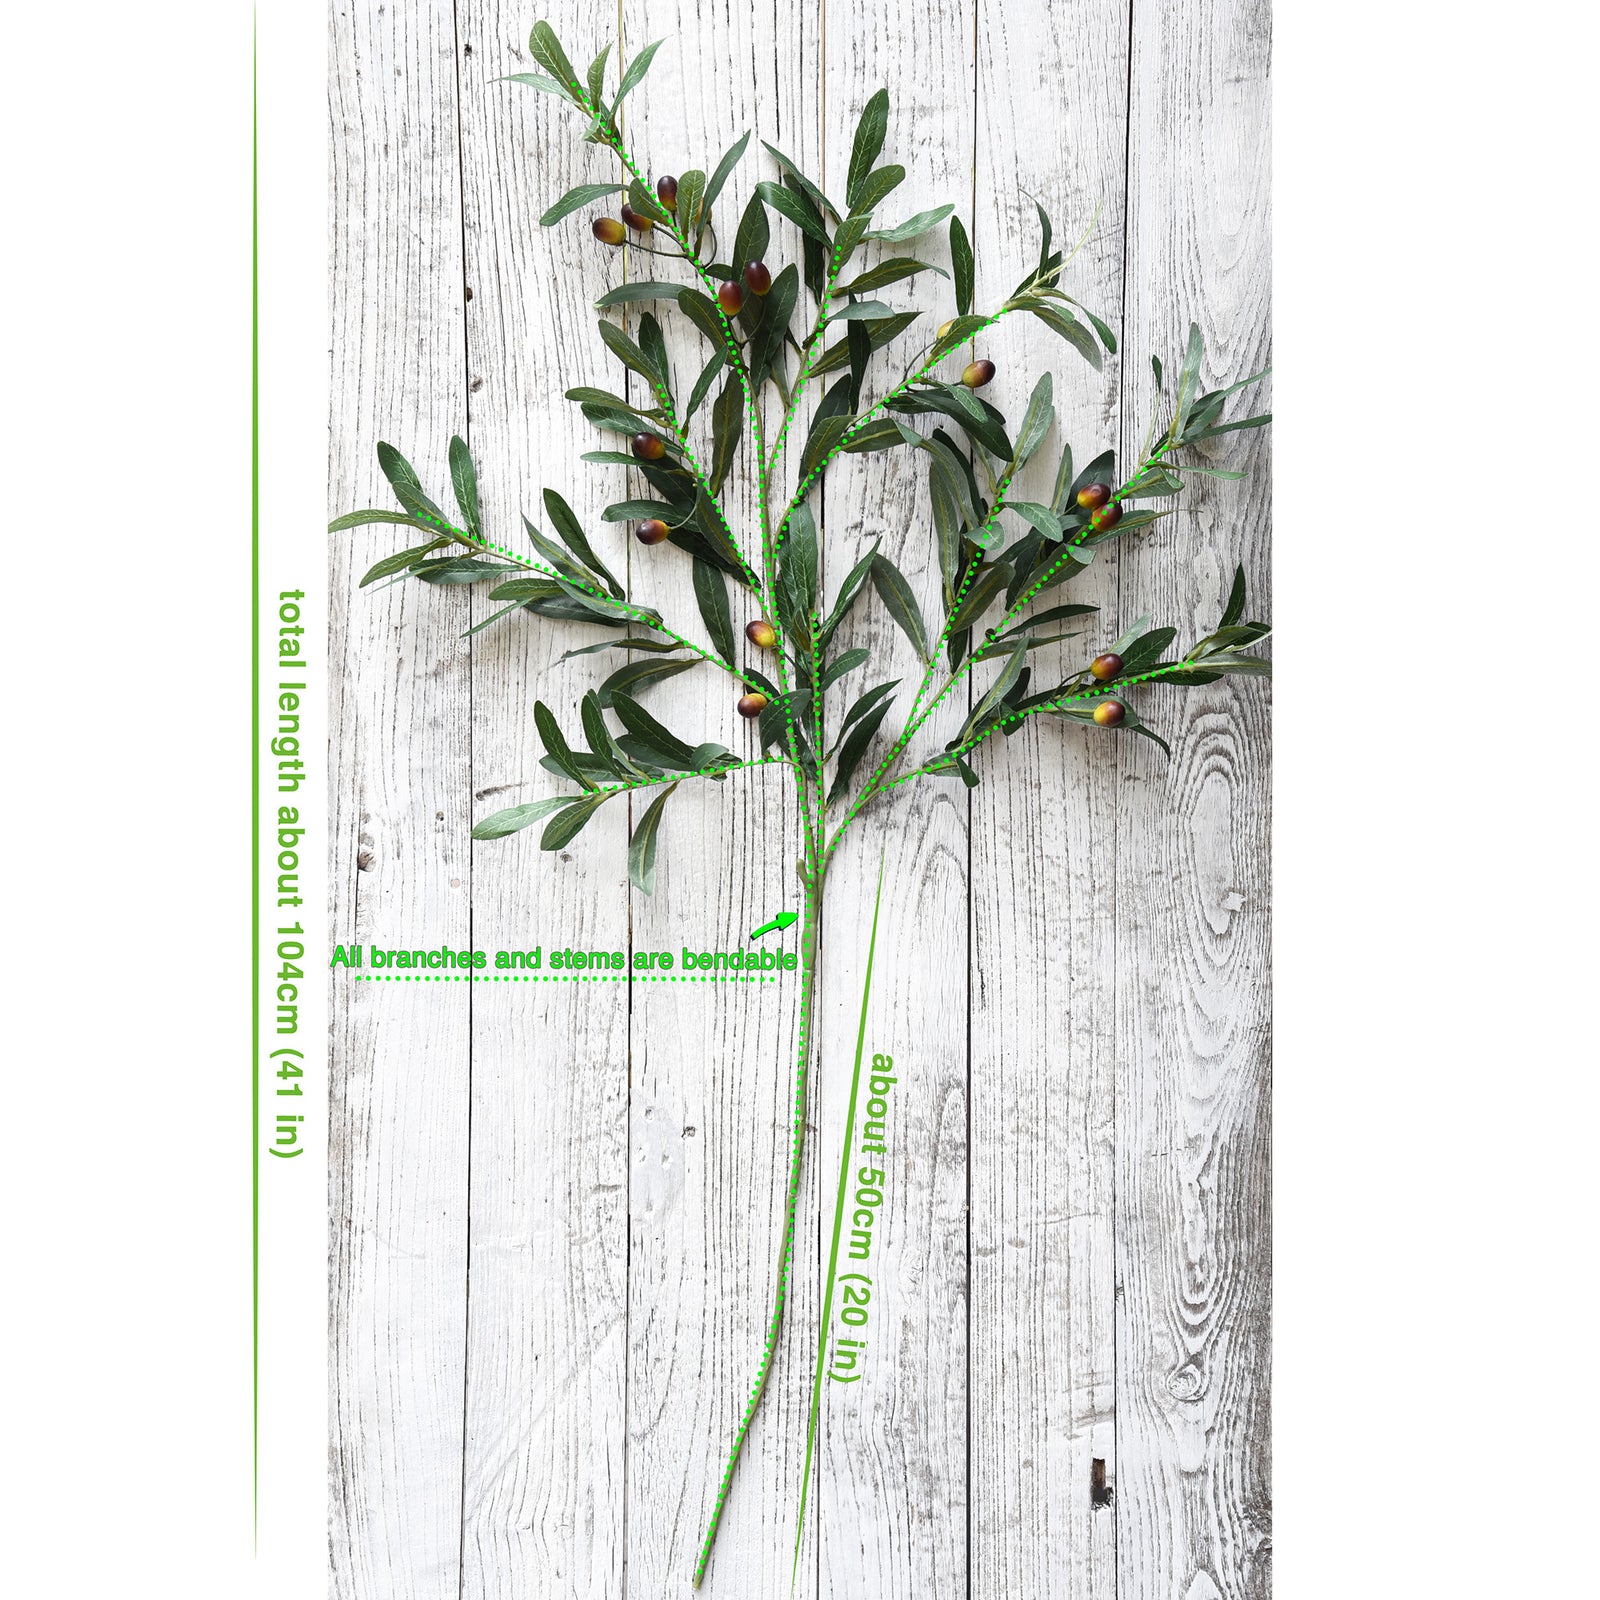 Lifelike Premium Olive Stems: Quality 30-inch Artificial Greenery for Floral  Arrangements and Stylish Decor 6 Stems Fiveseasonstuff Floral 